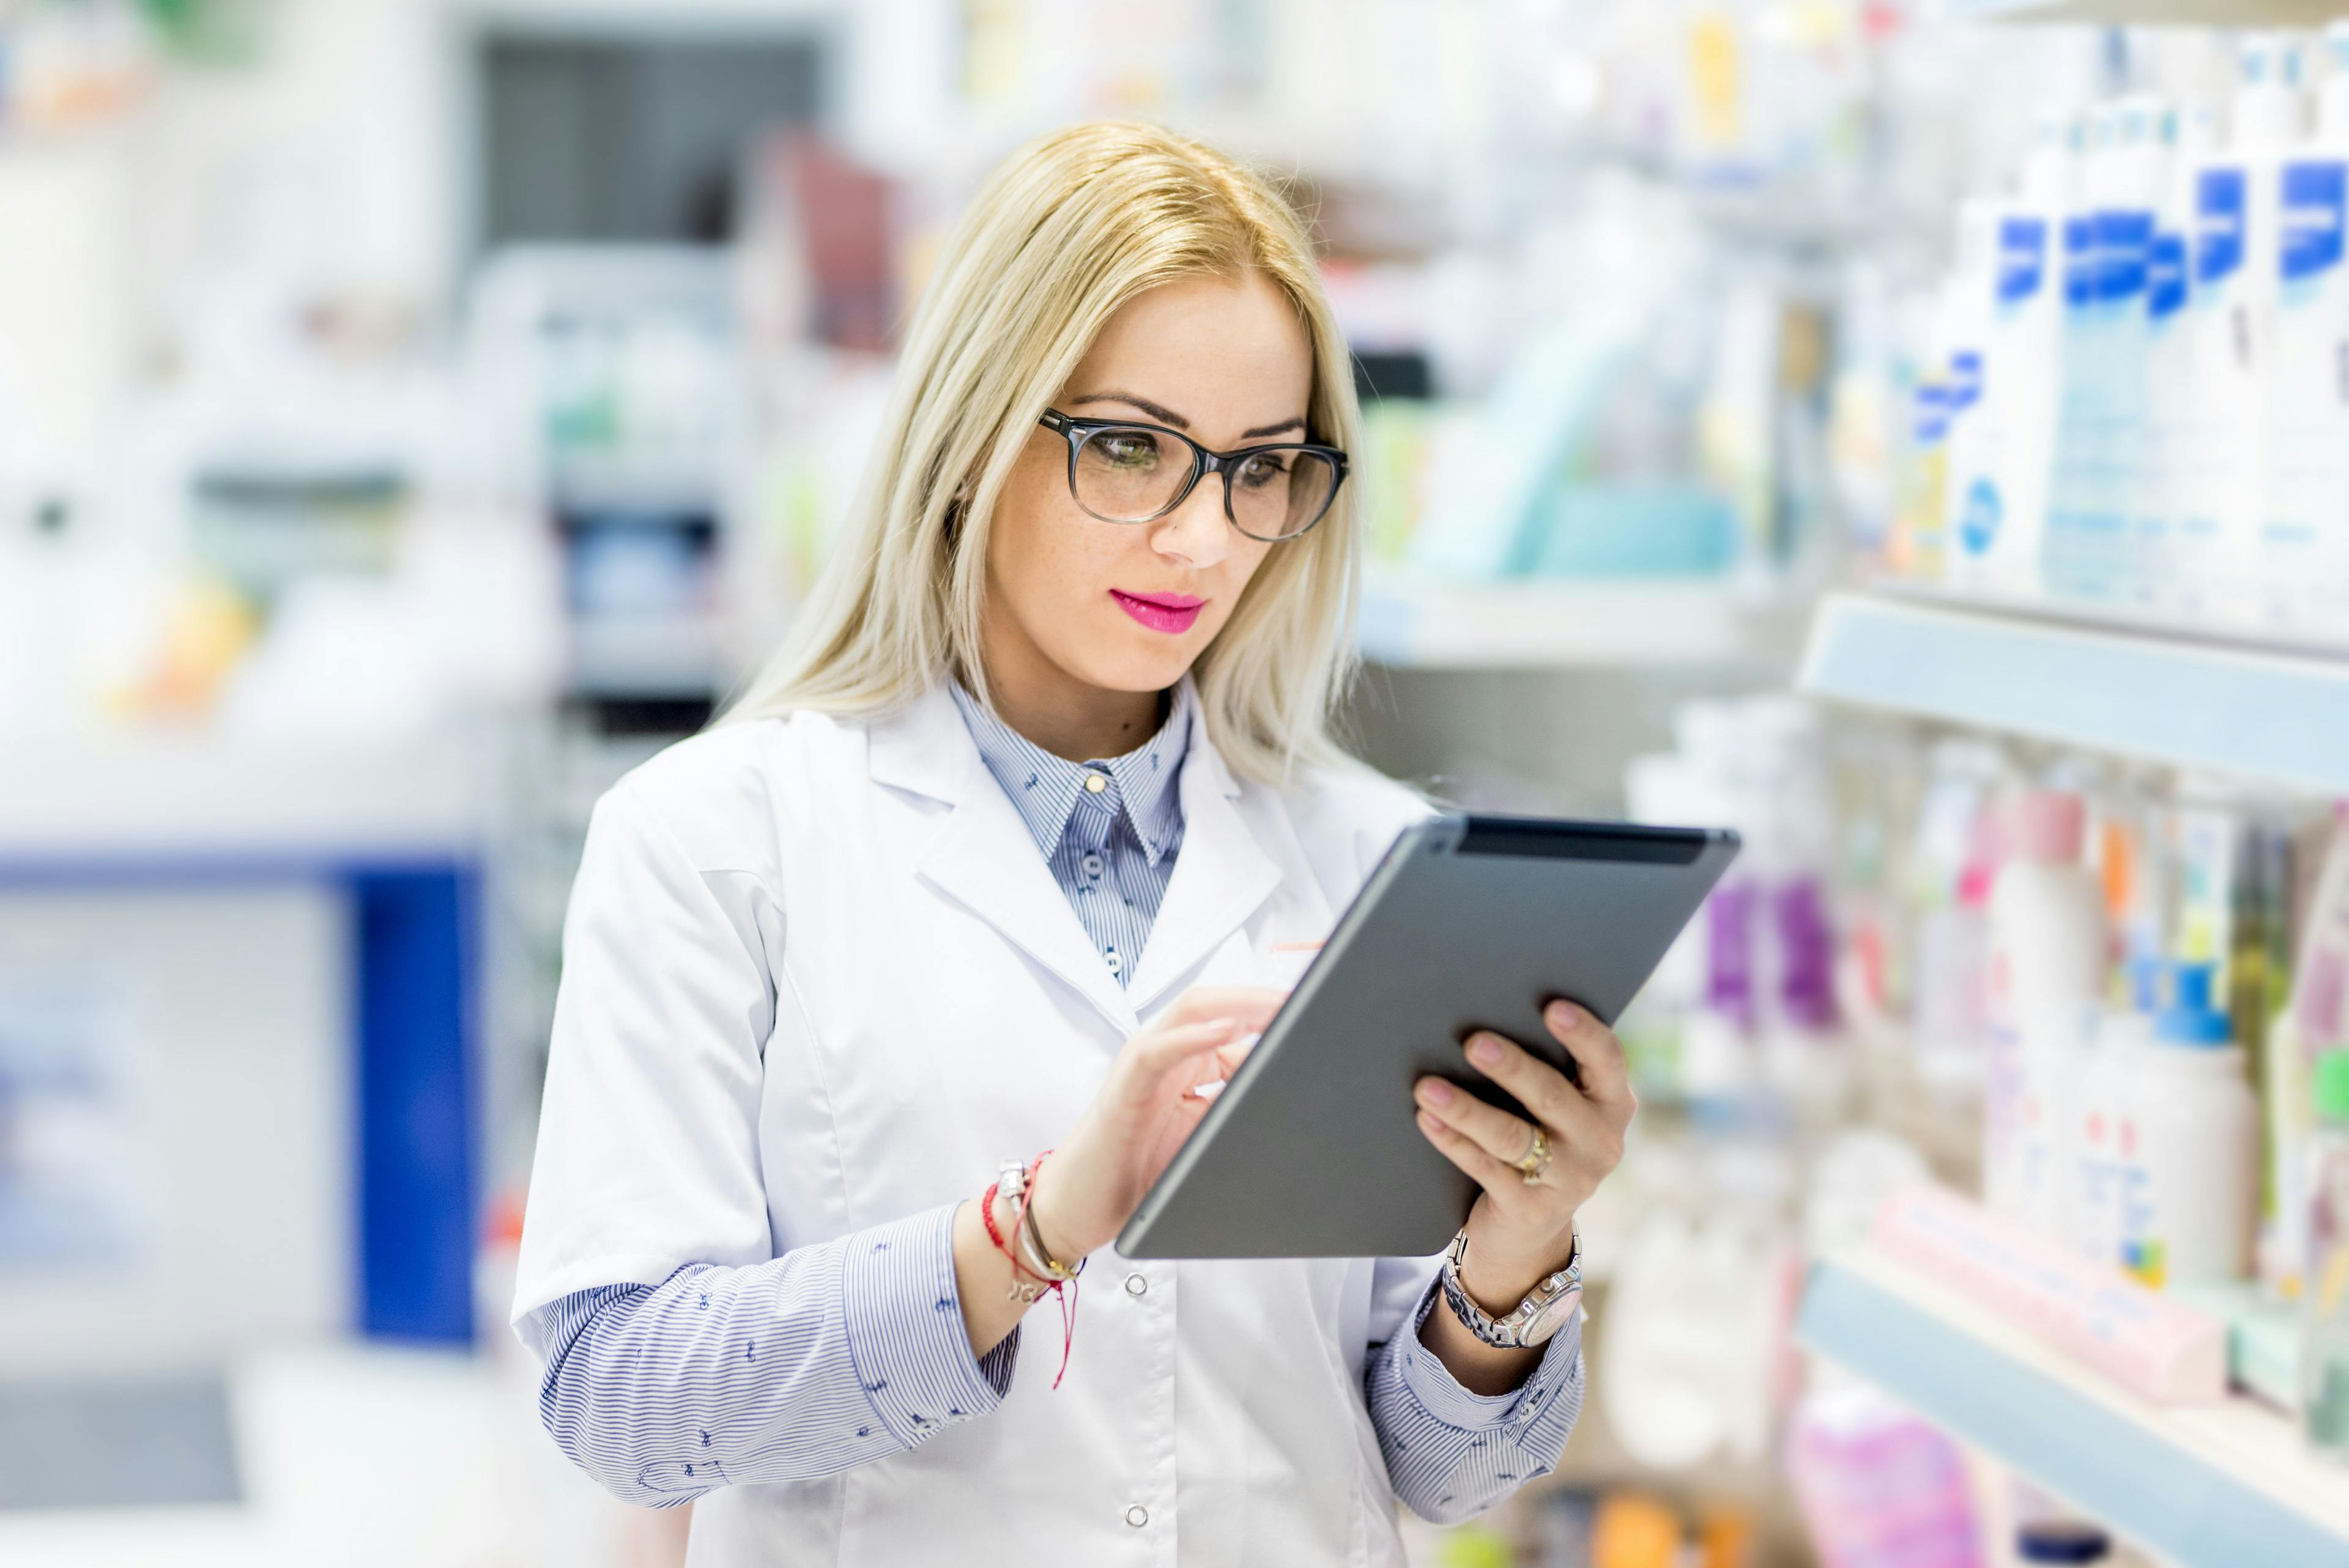 Successful Career Ladder Helps Retain Pharmacy Technicians